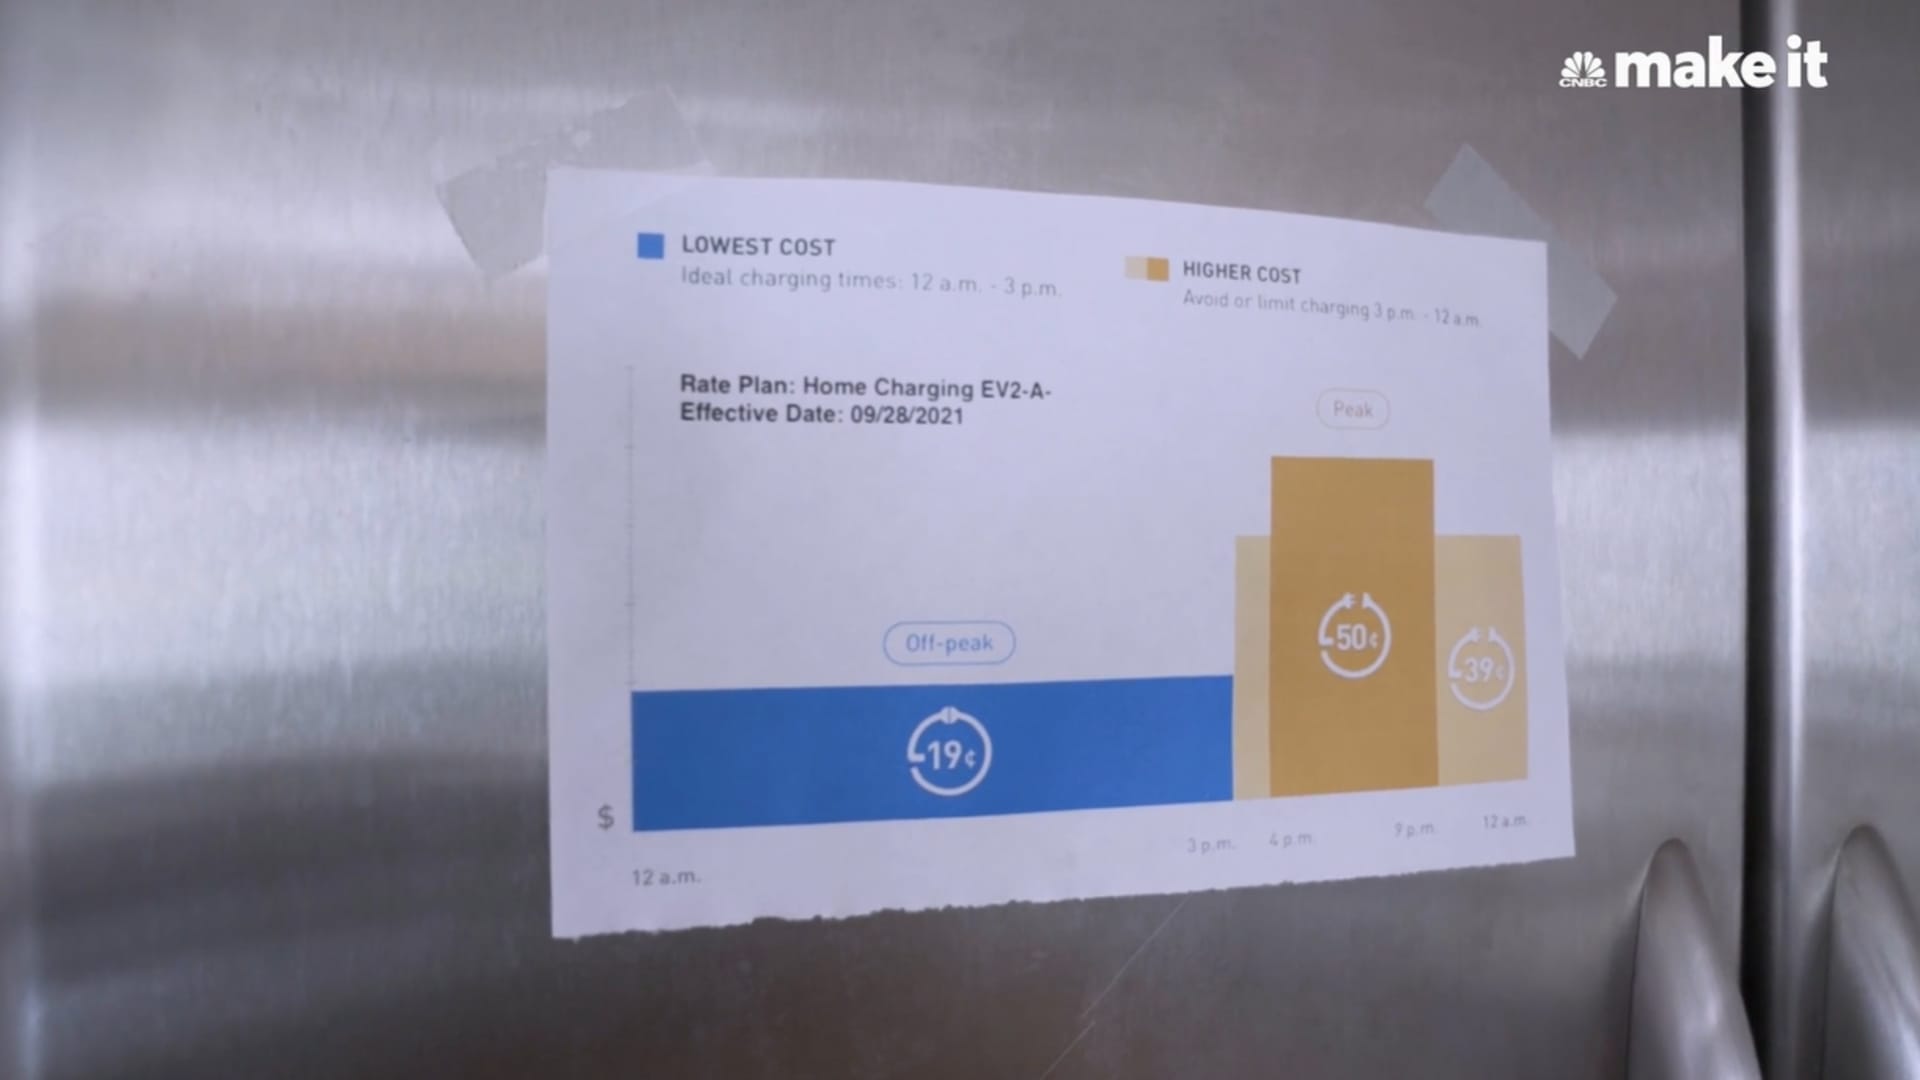 Wey keeps a chart of electricity usage rates taped to his fridge.